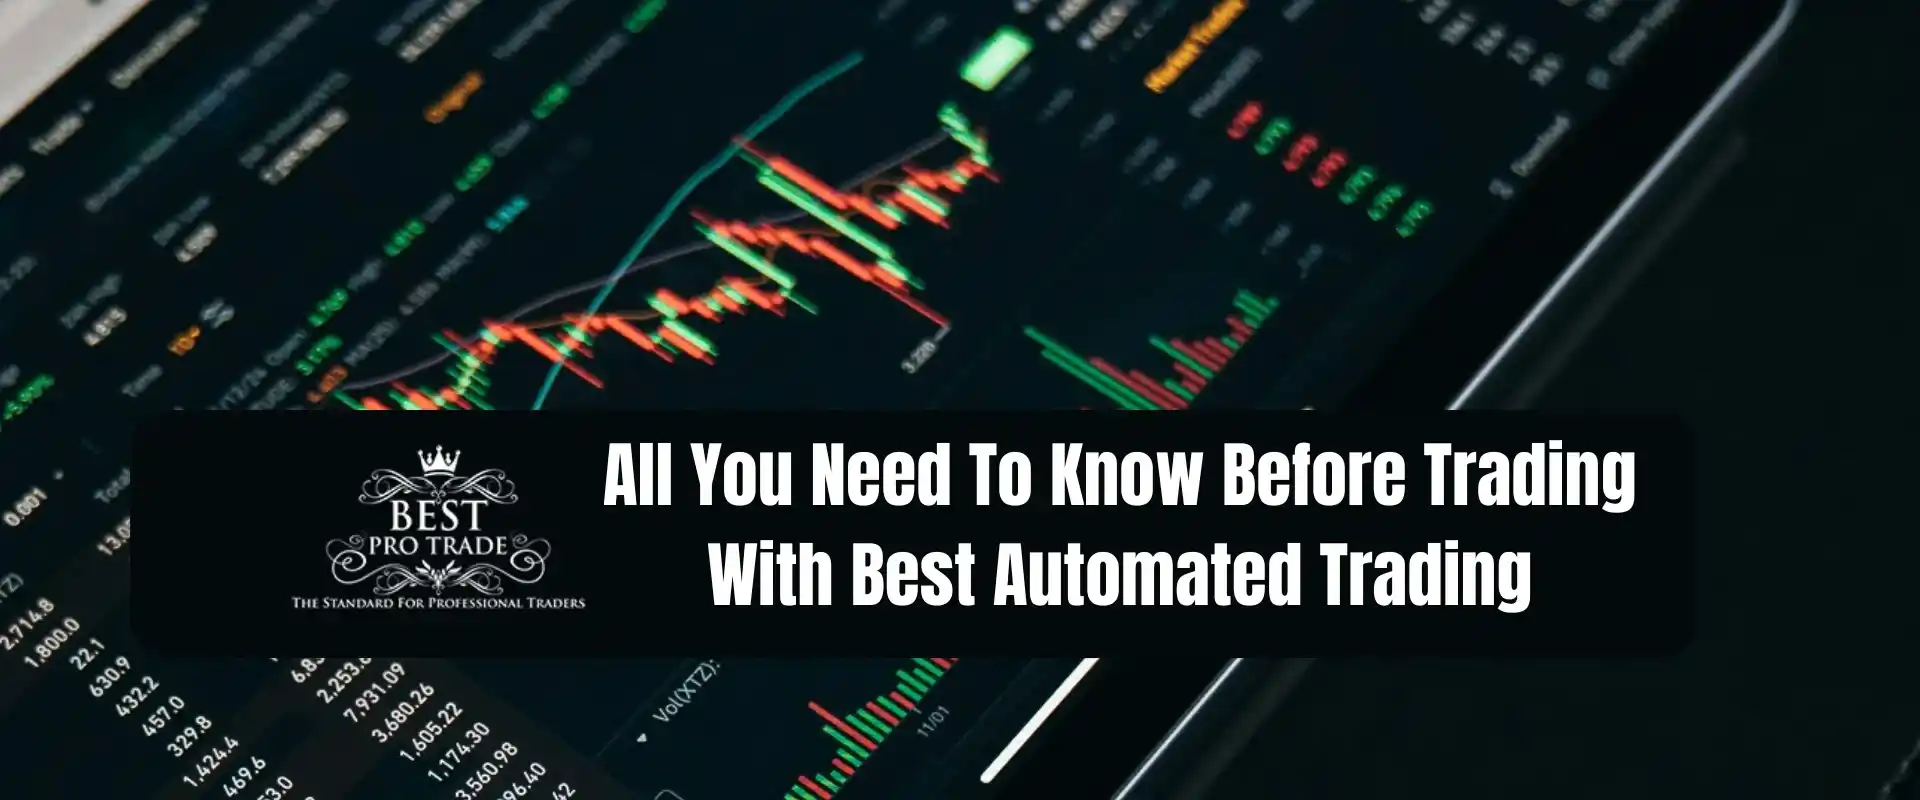 Best Automated Trading